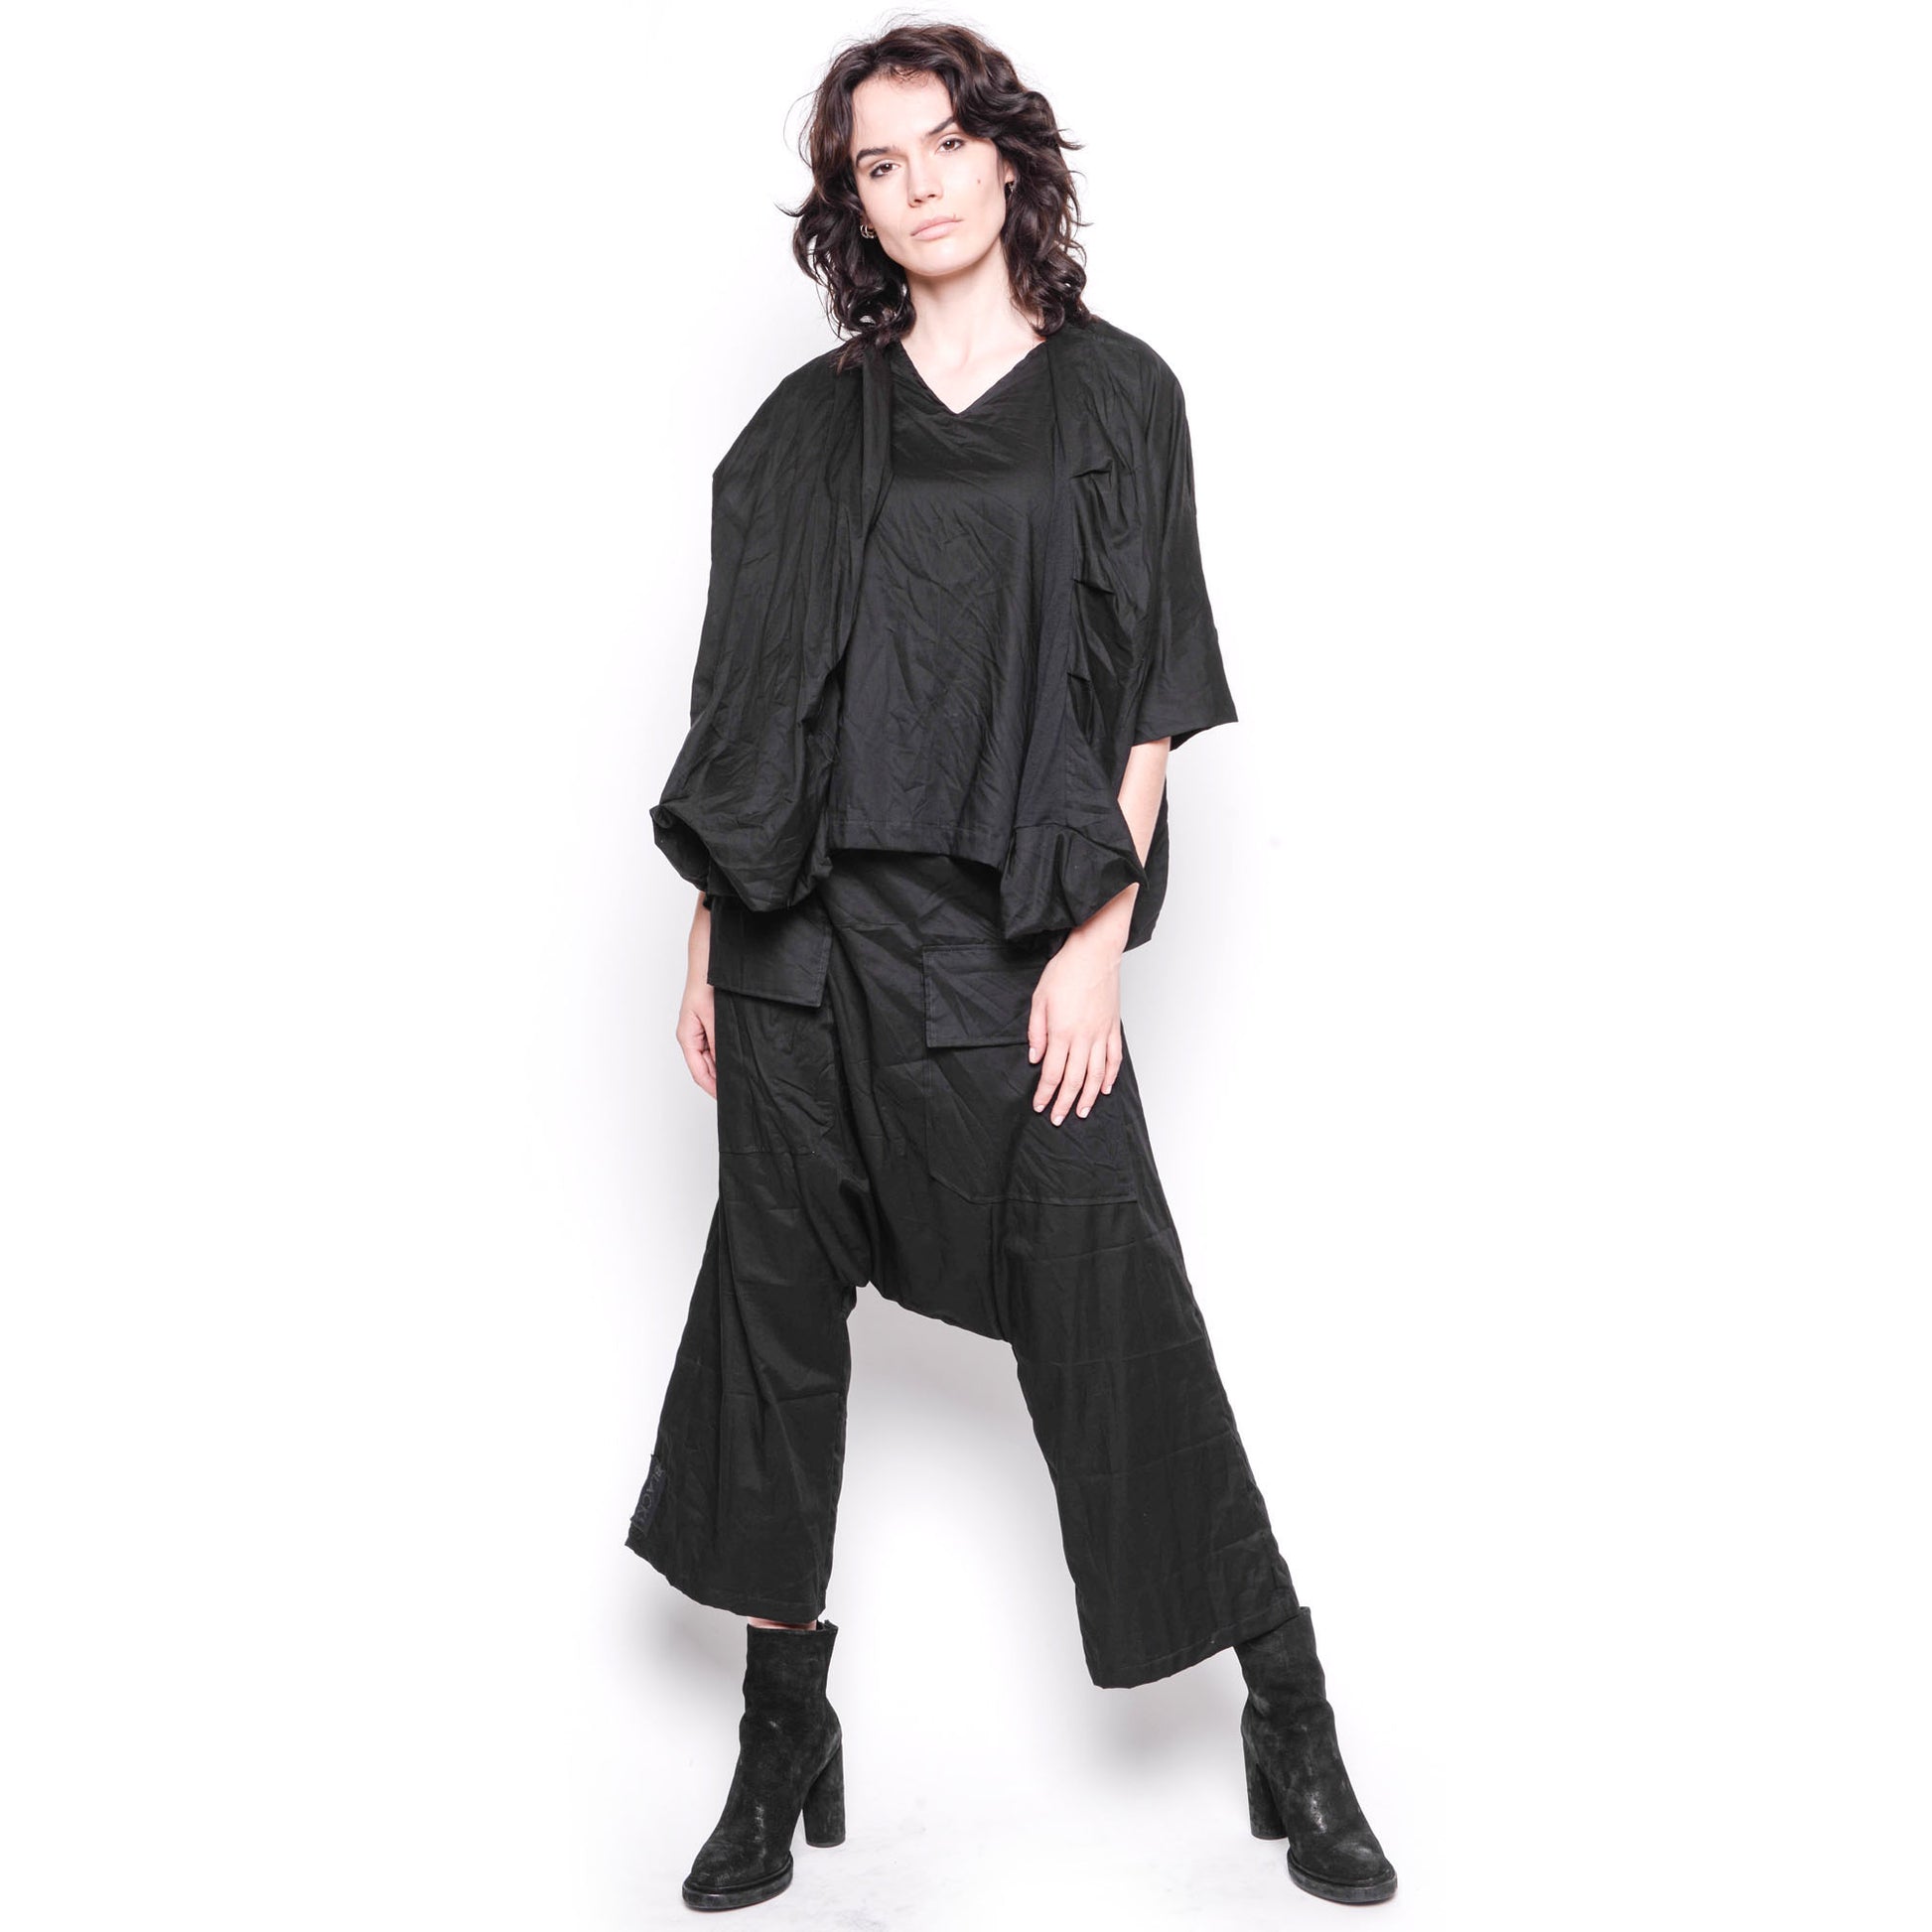 Cotton low crotch pant with pockets